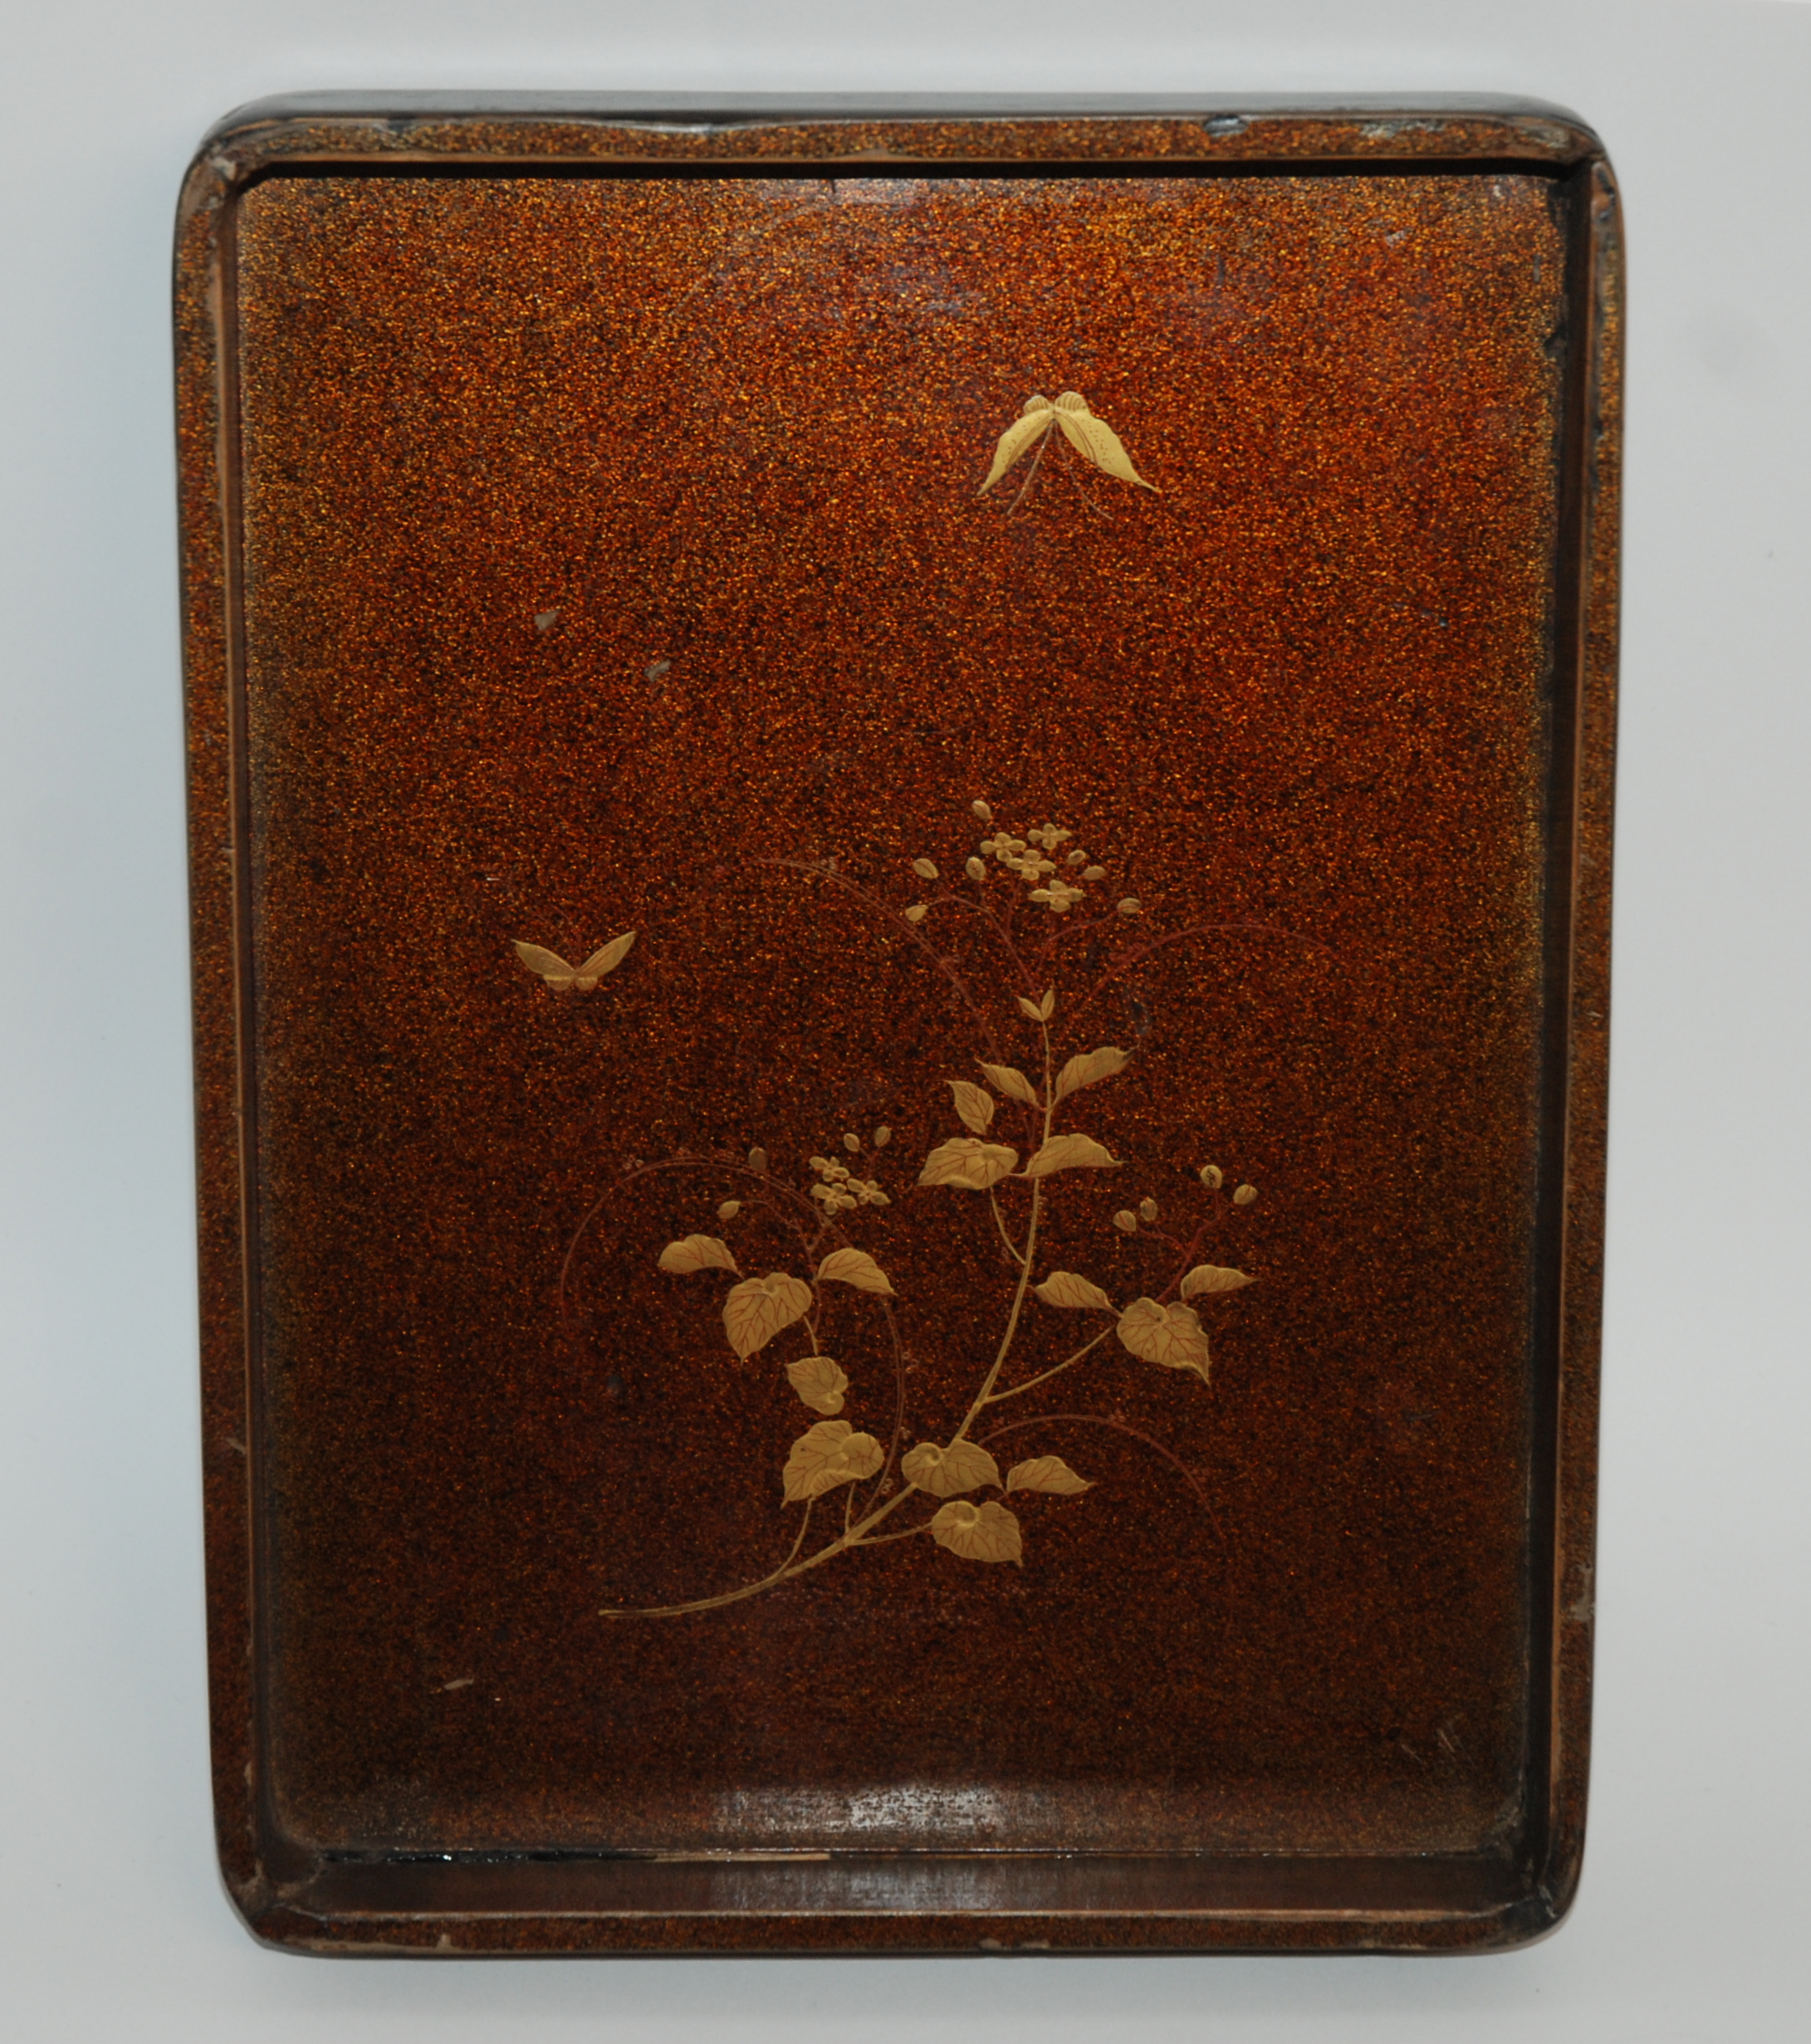 A CHINESE BLACK LACQUERED GAMES BOX the cover decorated with birds and flowers in a river landscape, - Image 9 of 9